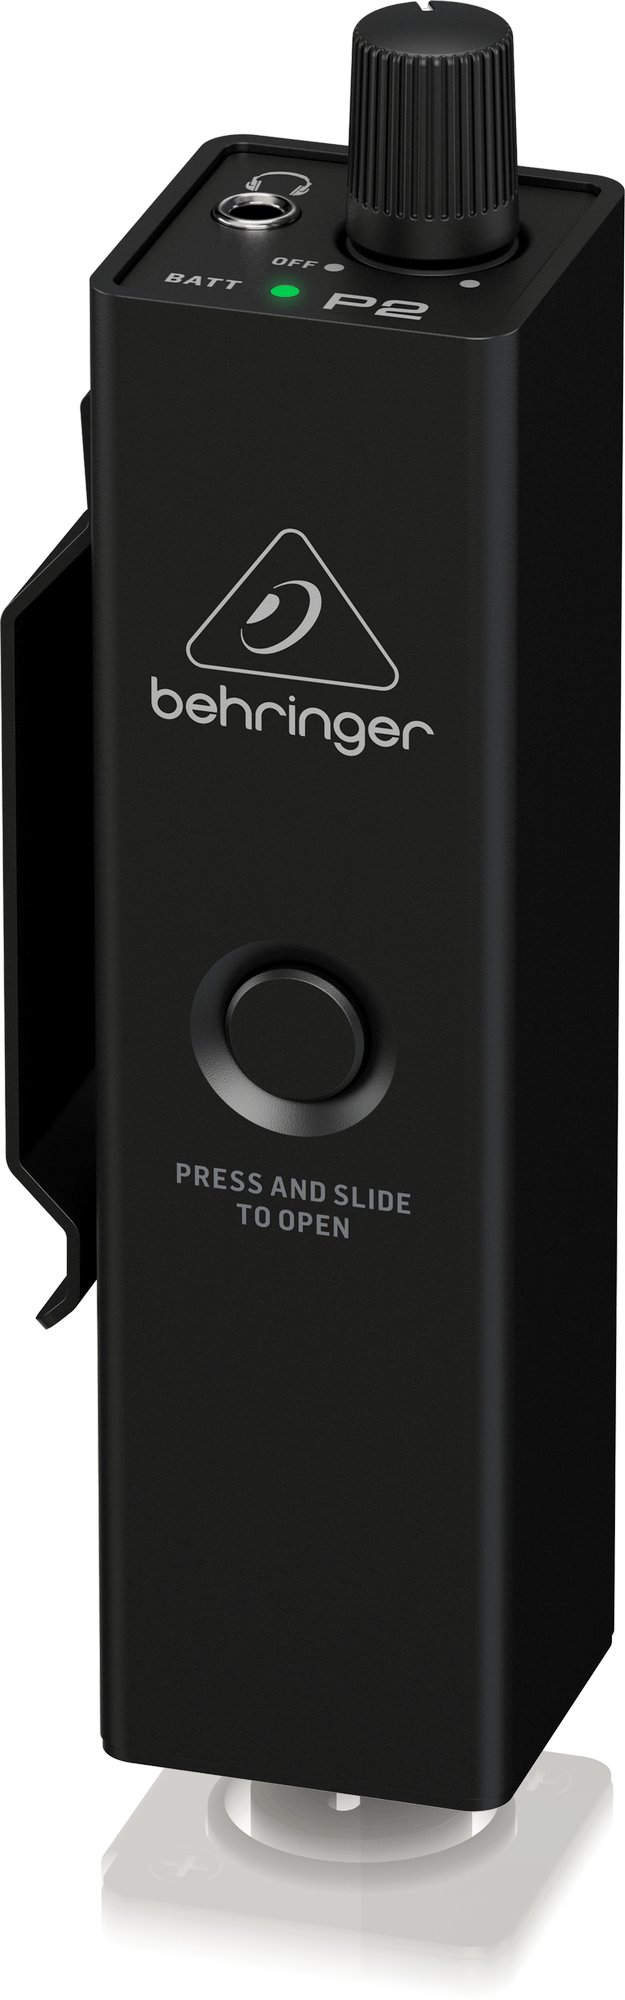 Behringer P2 In-Ear Monitoring Signal Processors